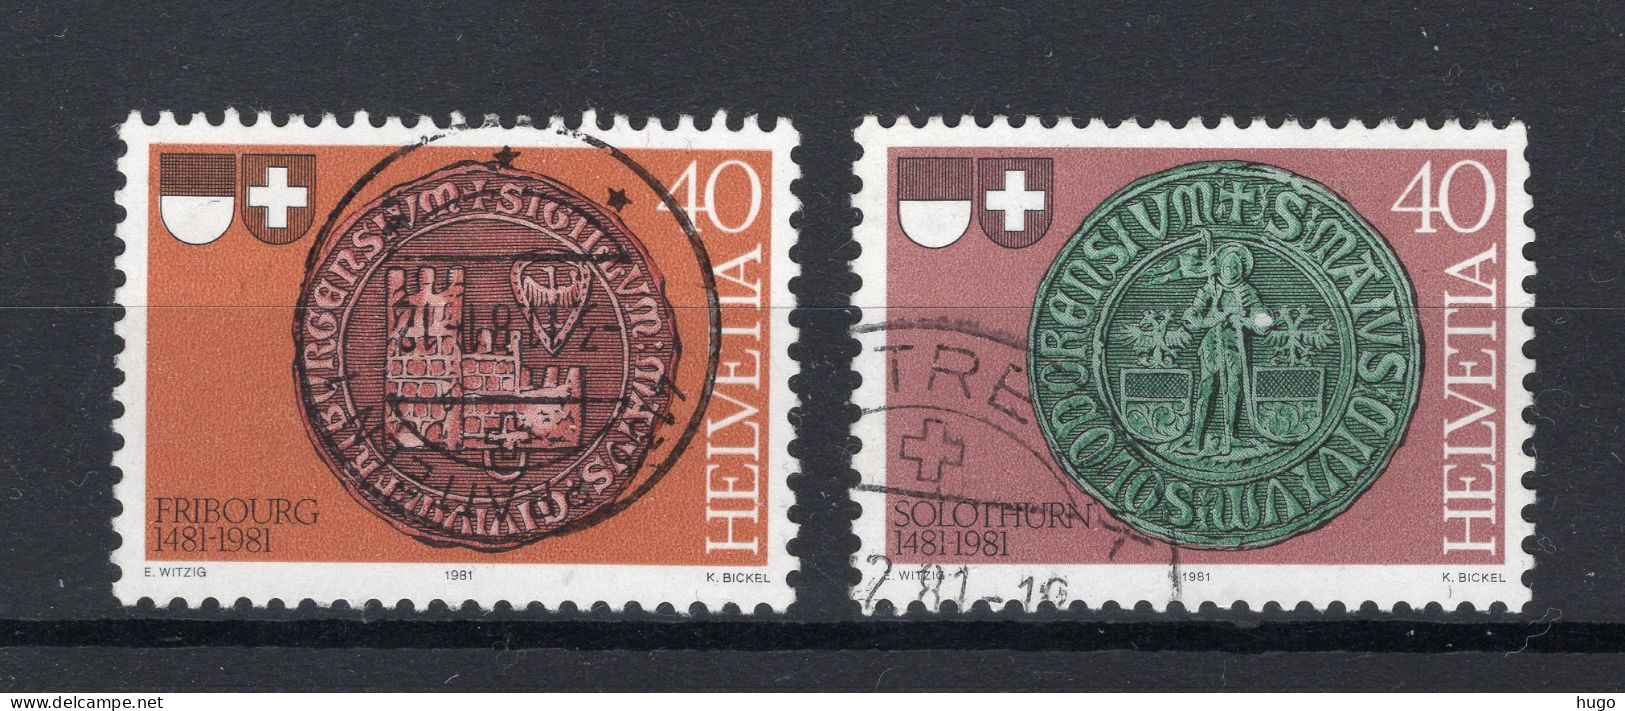 ZWITSERLAND Yt. 1132/1133° Gestempeld 1981 - Used Stamps